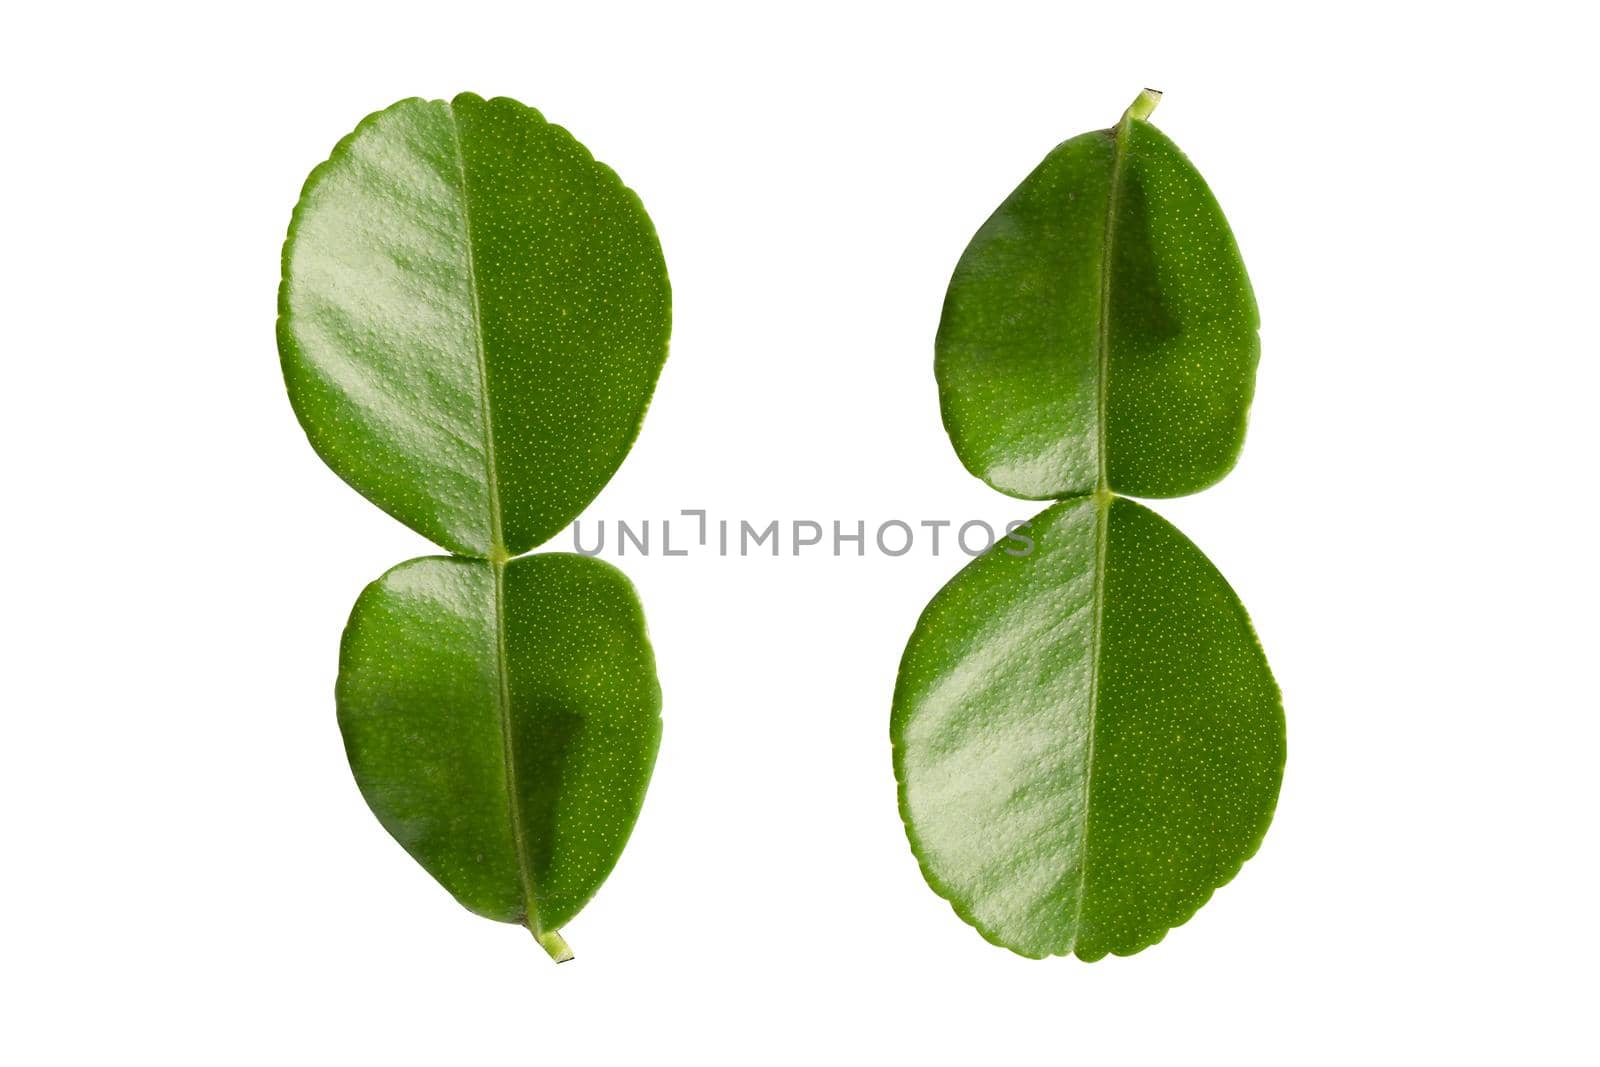 Fresh bergamot leaf or kaffir lime isolate on white background with clipping path, vegetable herb for cooking and health. by pamai